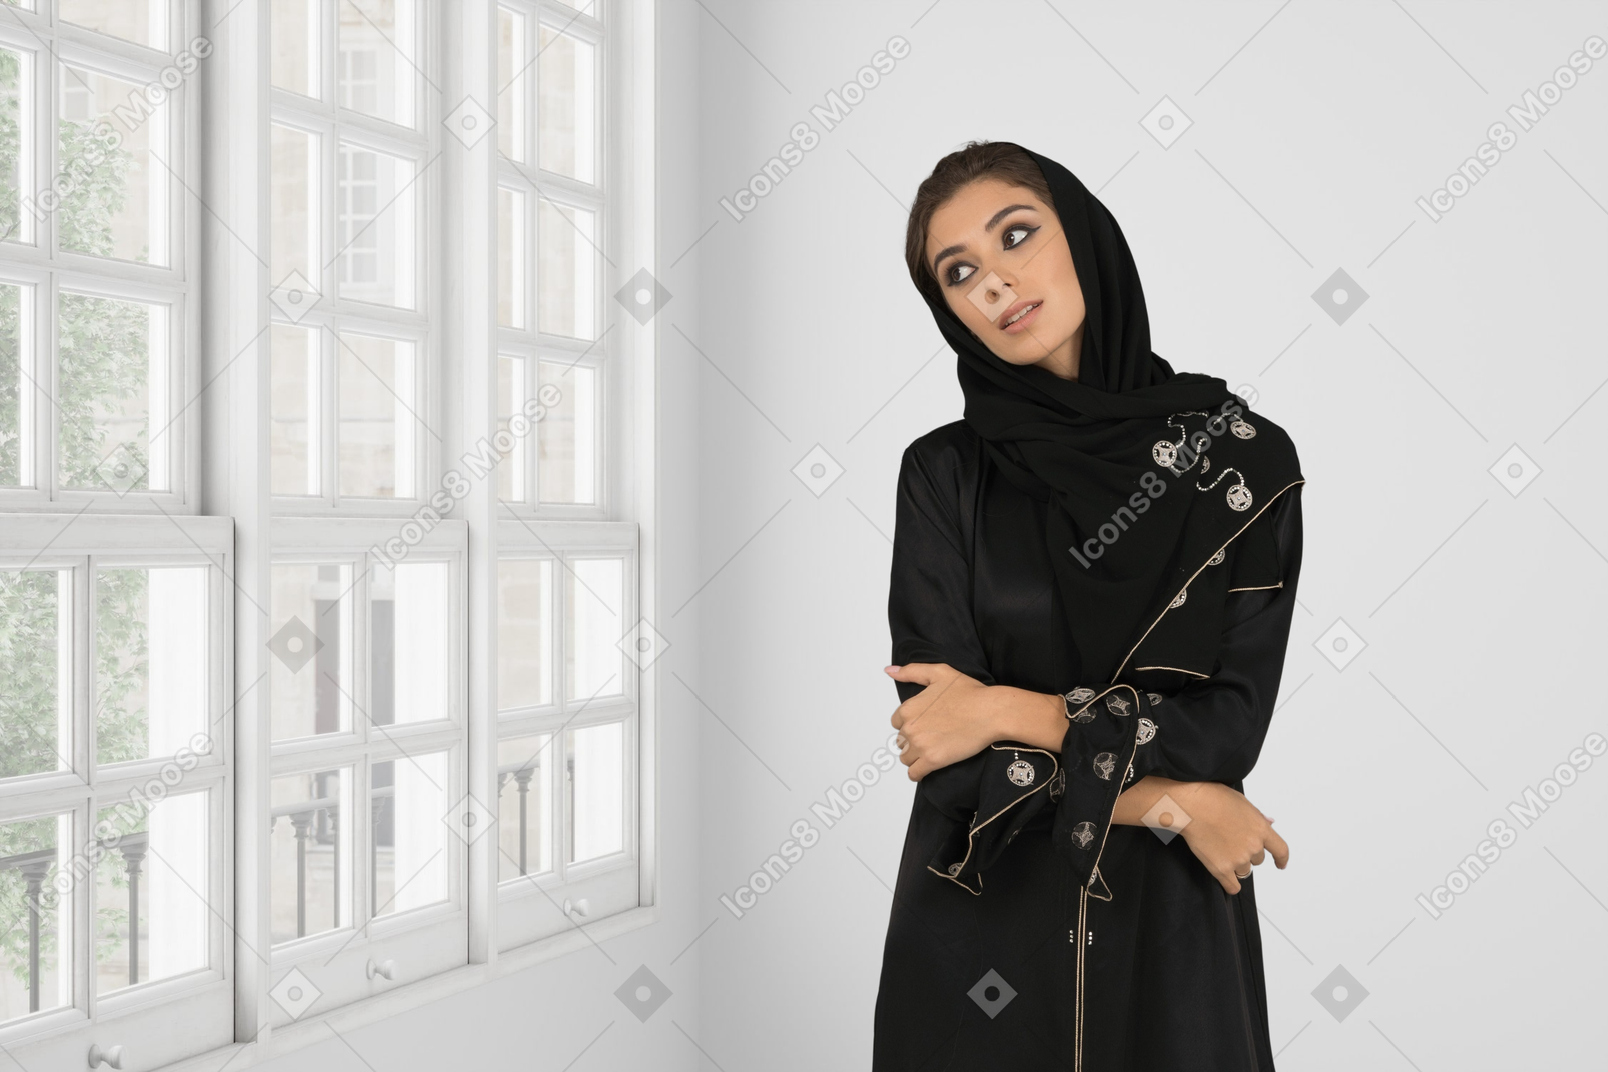 A woman in a black sweater and long skirt standing in front of a window